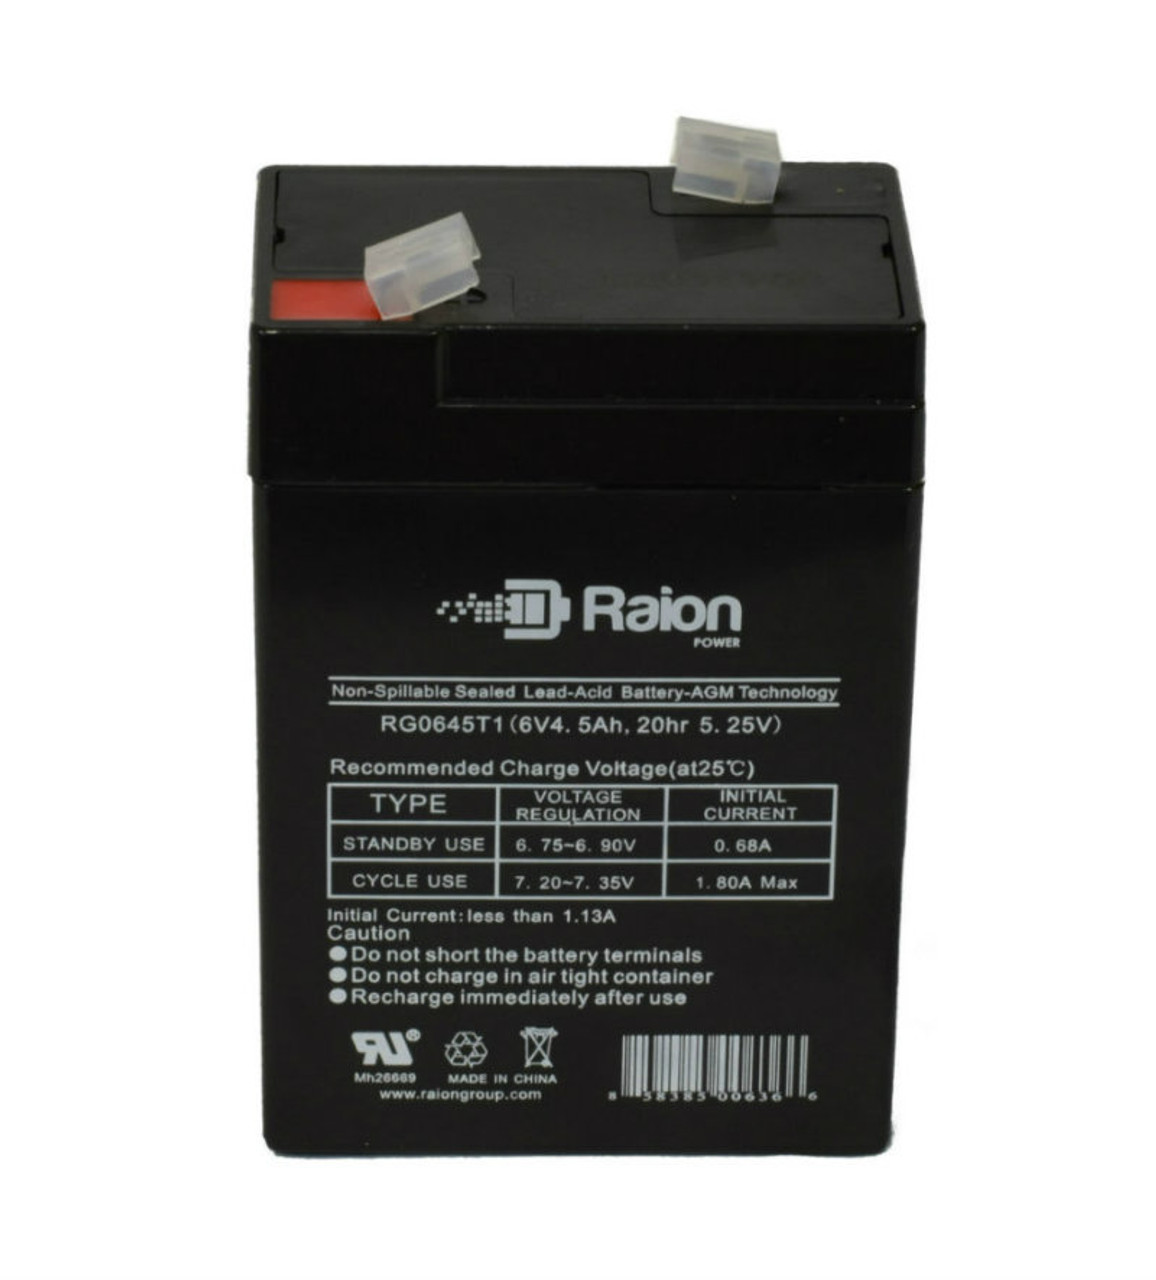 Raion Power RG0645T1 Replacement Battery Cartridge for Hi-Light 3901